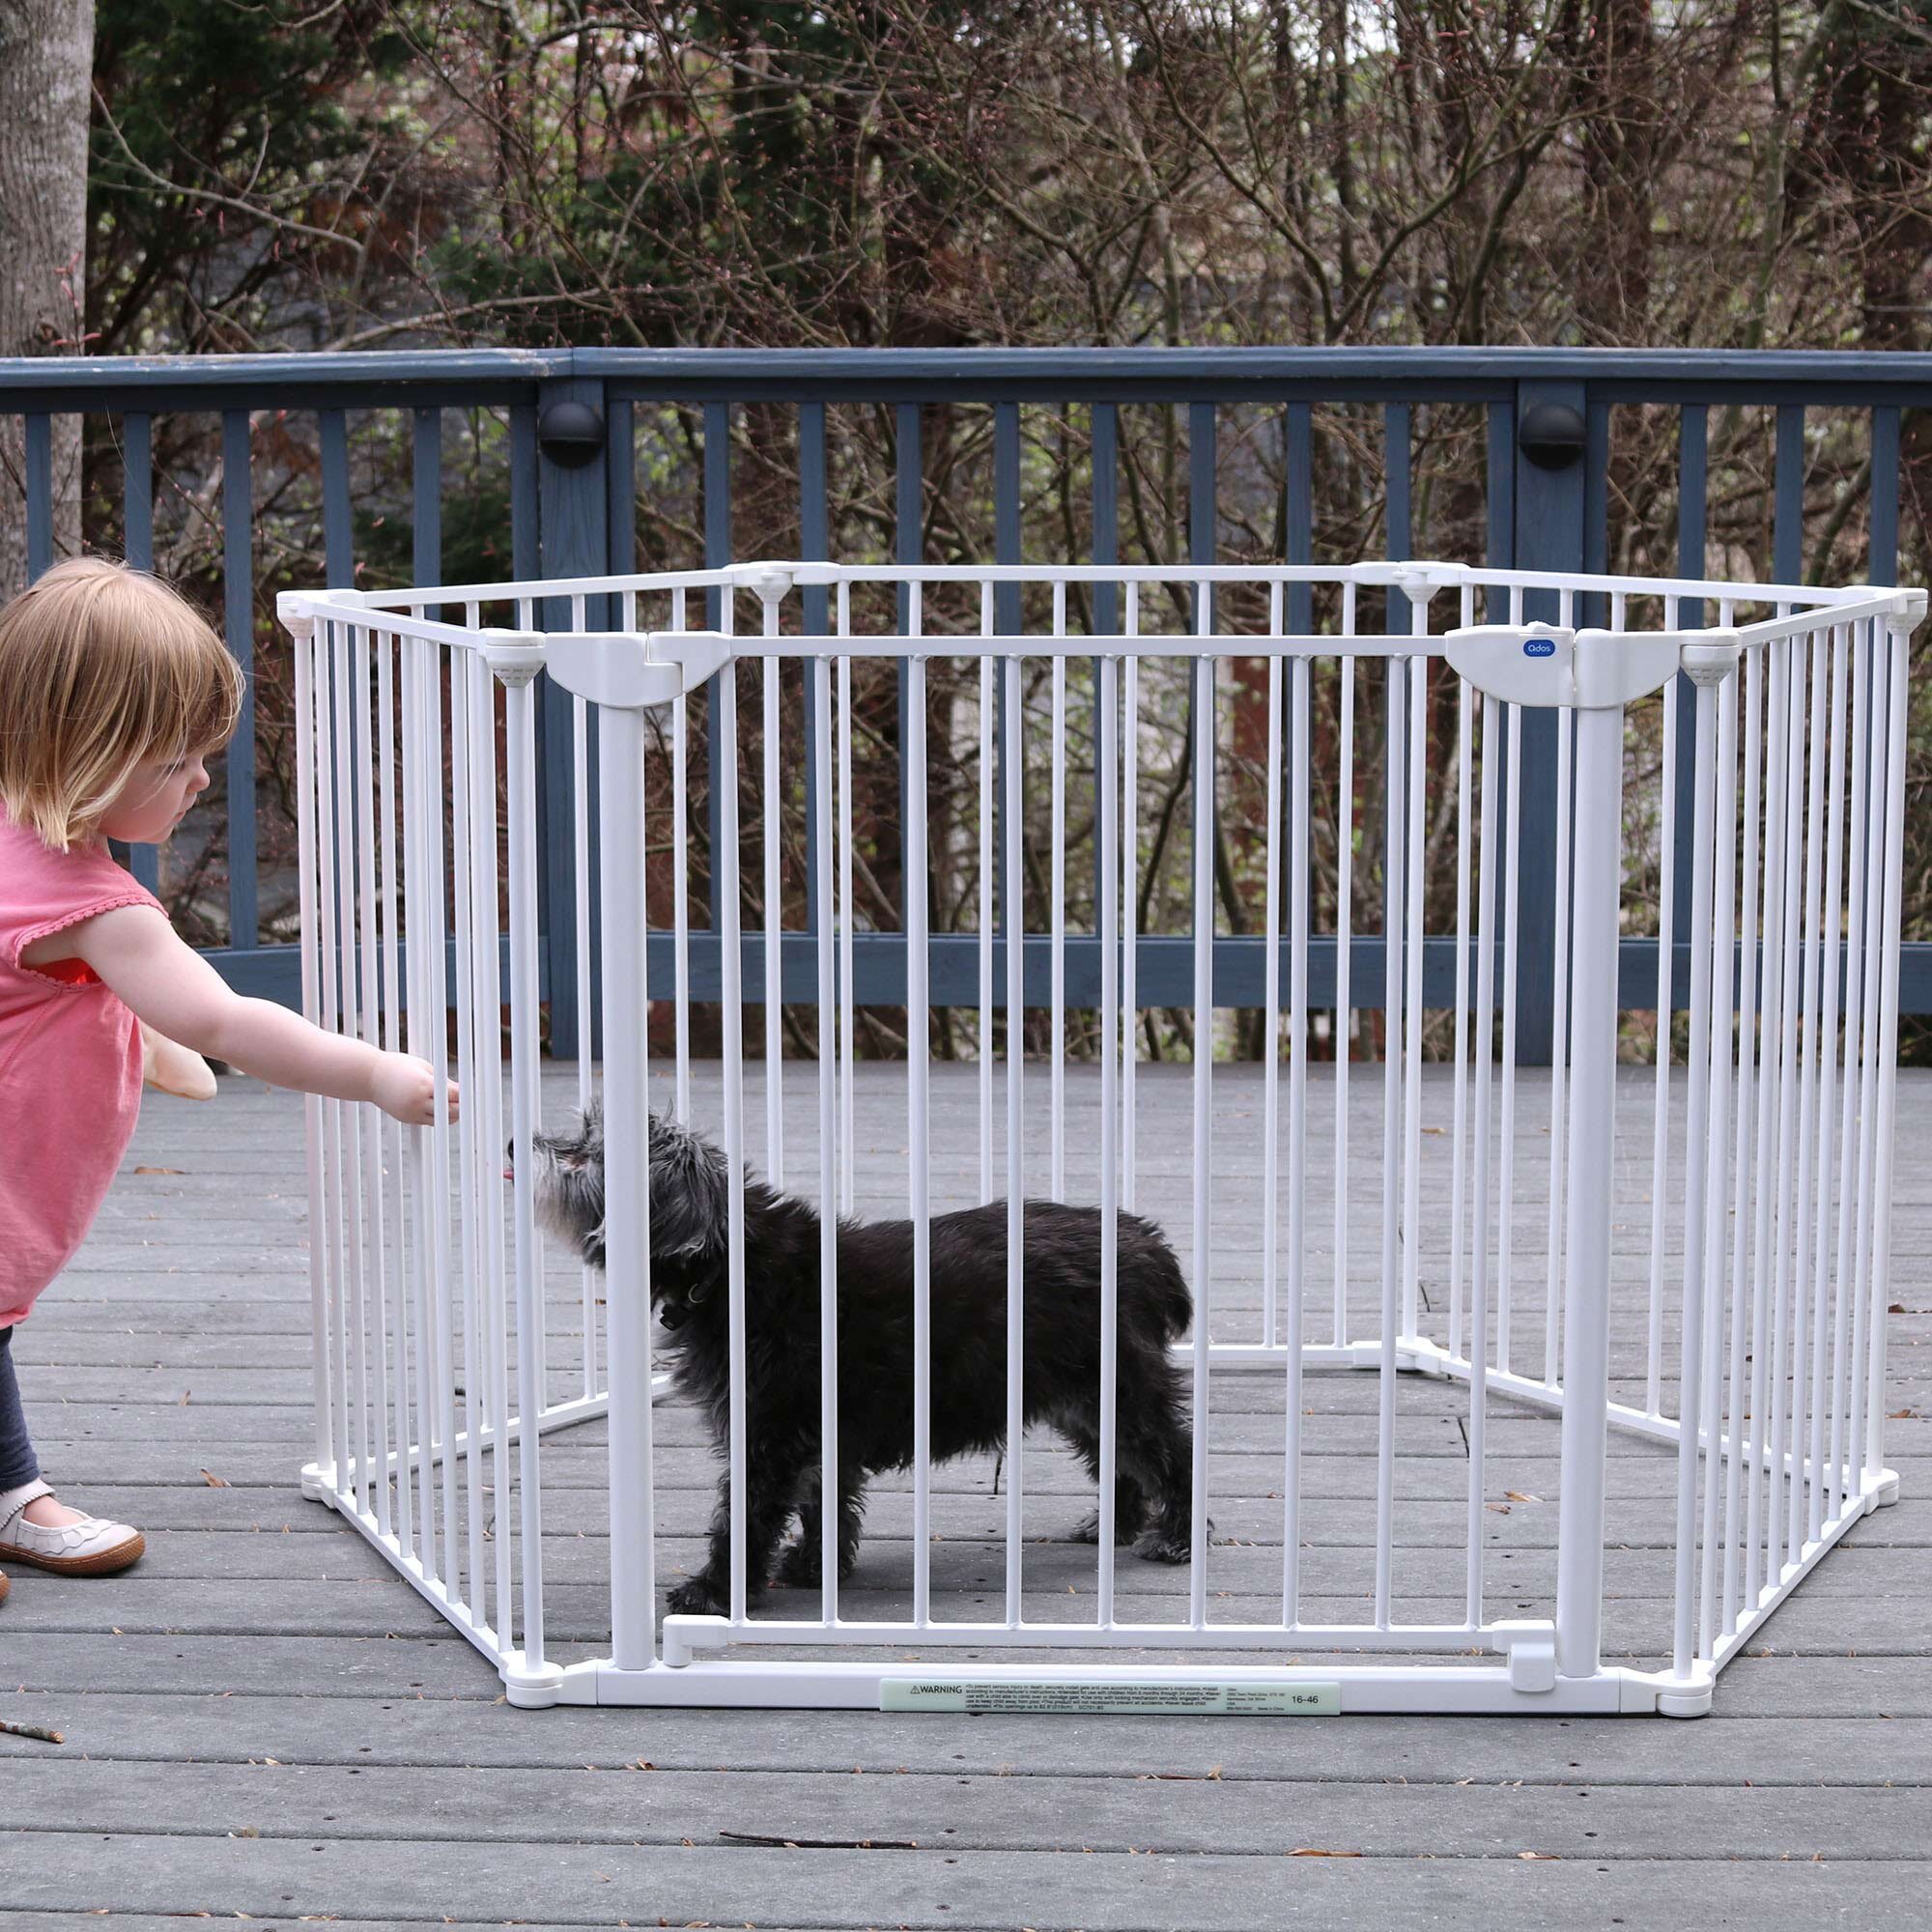 Construct-a-Safegate blocking in a dog, protecting the child